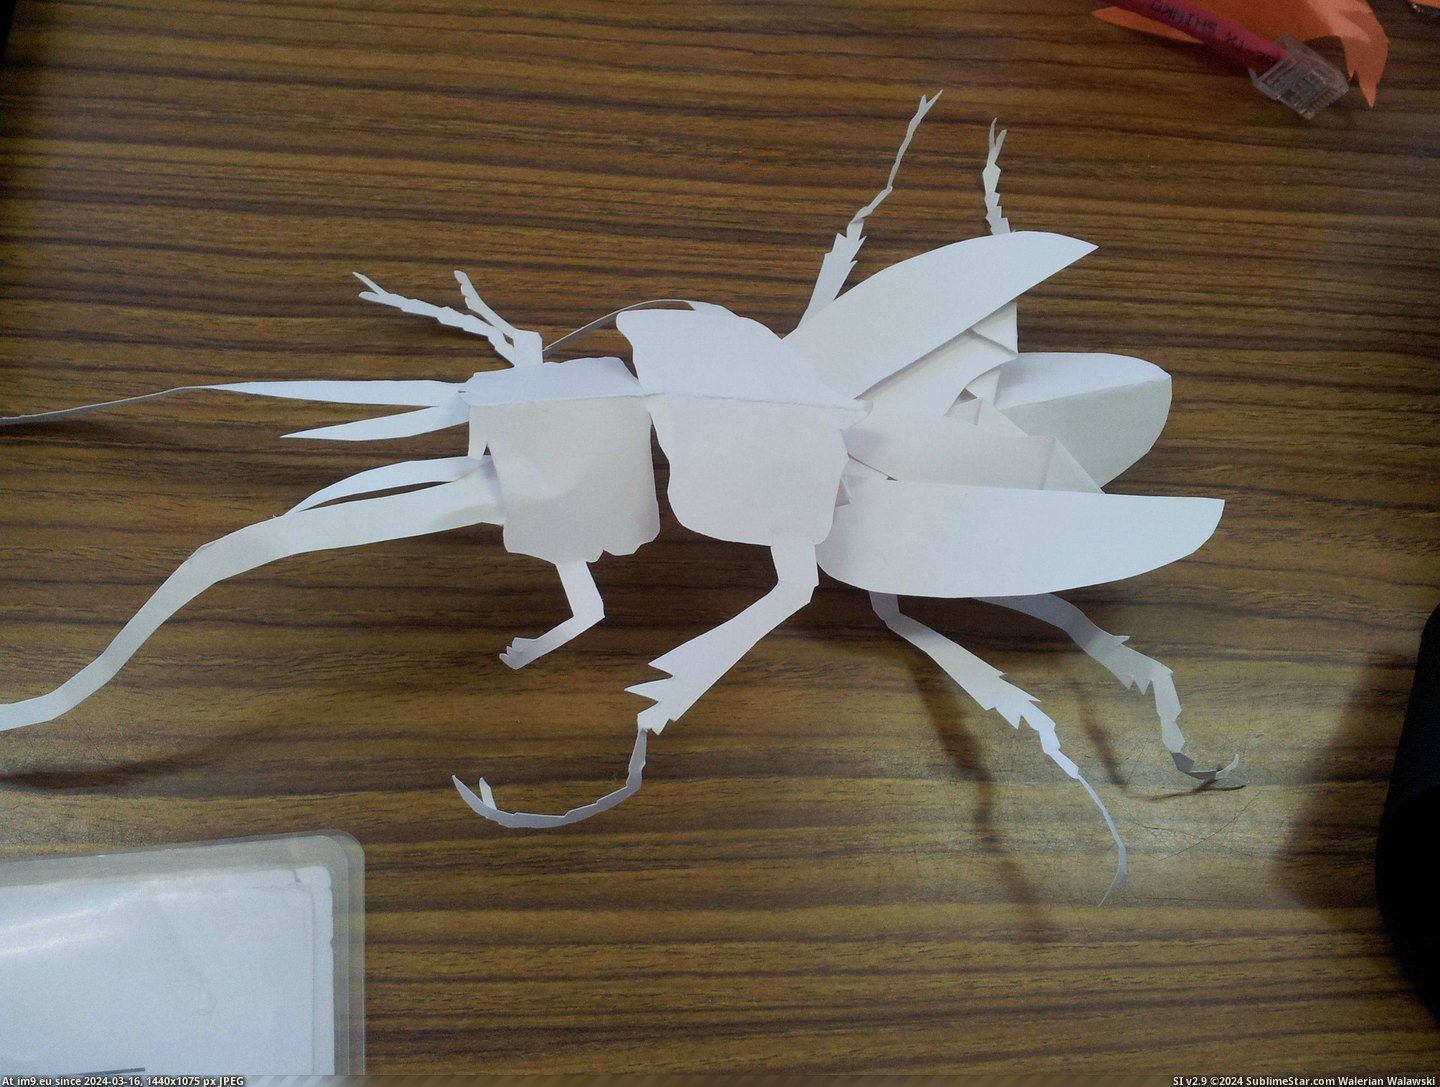 #One #Paper #Students #Creatures #Freehand #Bored #Completely [Pics] One of my students makes these creatures out of paper completely freehand whenever he is bored 1 Pic. (Image of album My r/PICS favs))